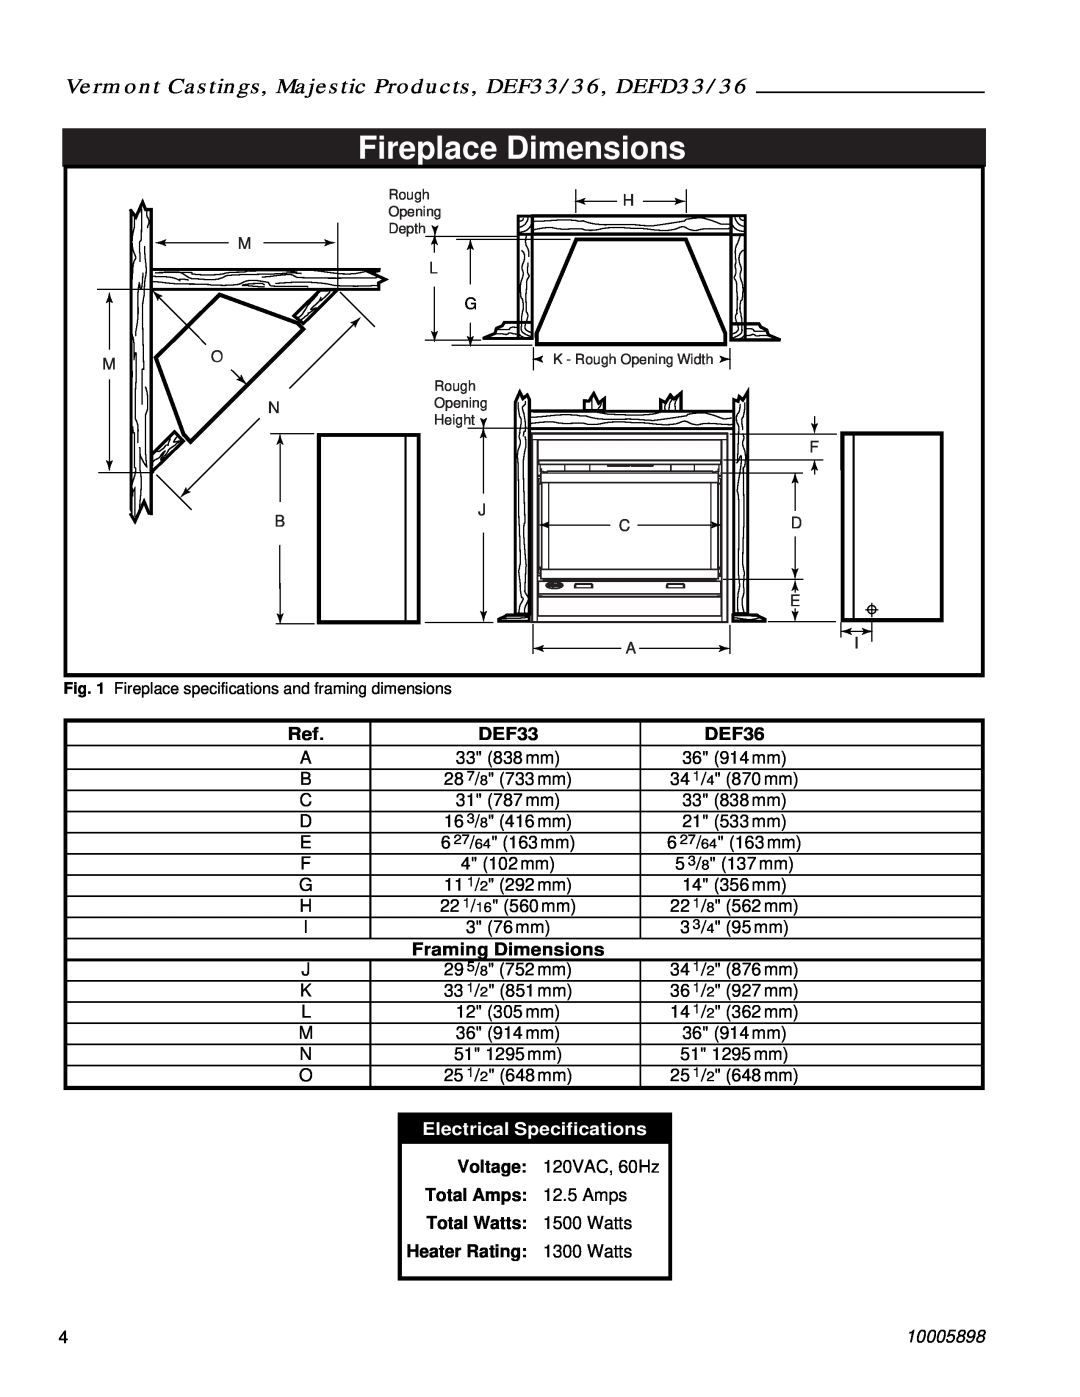 Vermont Casting DEFD36 manual Fireplace Dimensions, DEF33, DEF36, Framing Dimensions, Electrical Specifications, 10005898 